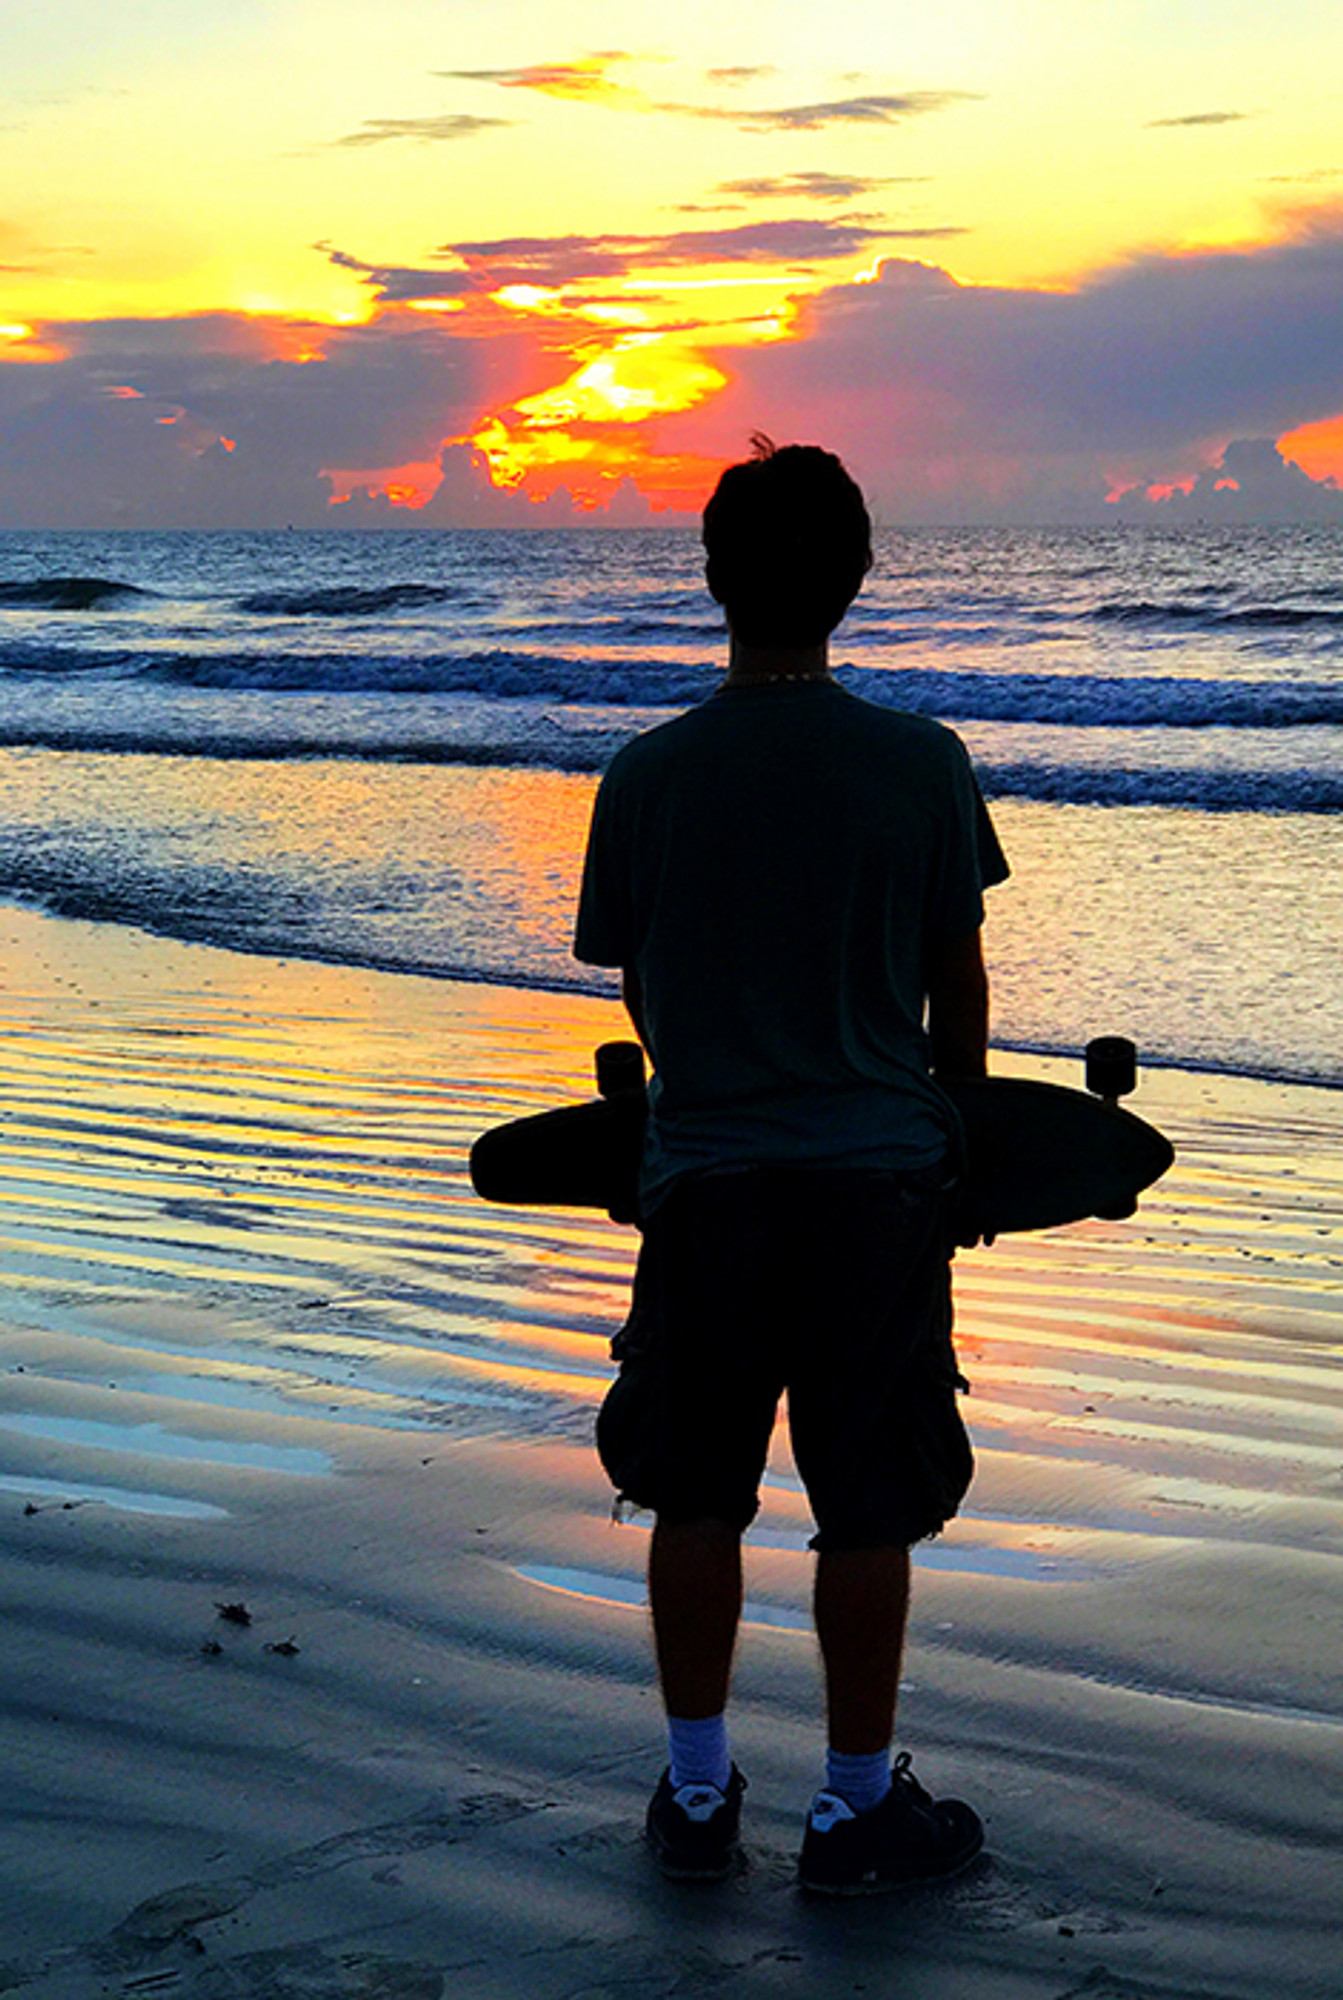 10 Tips For Taking Stunning iPhone Beach Photos